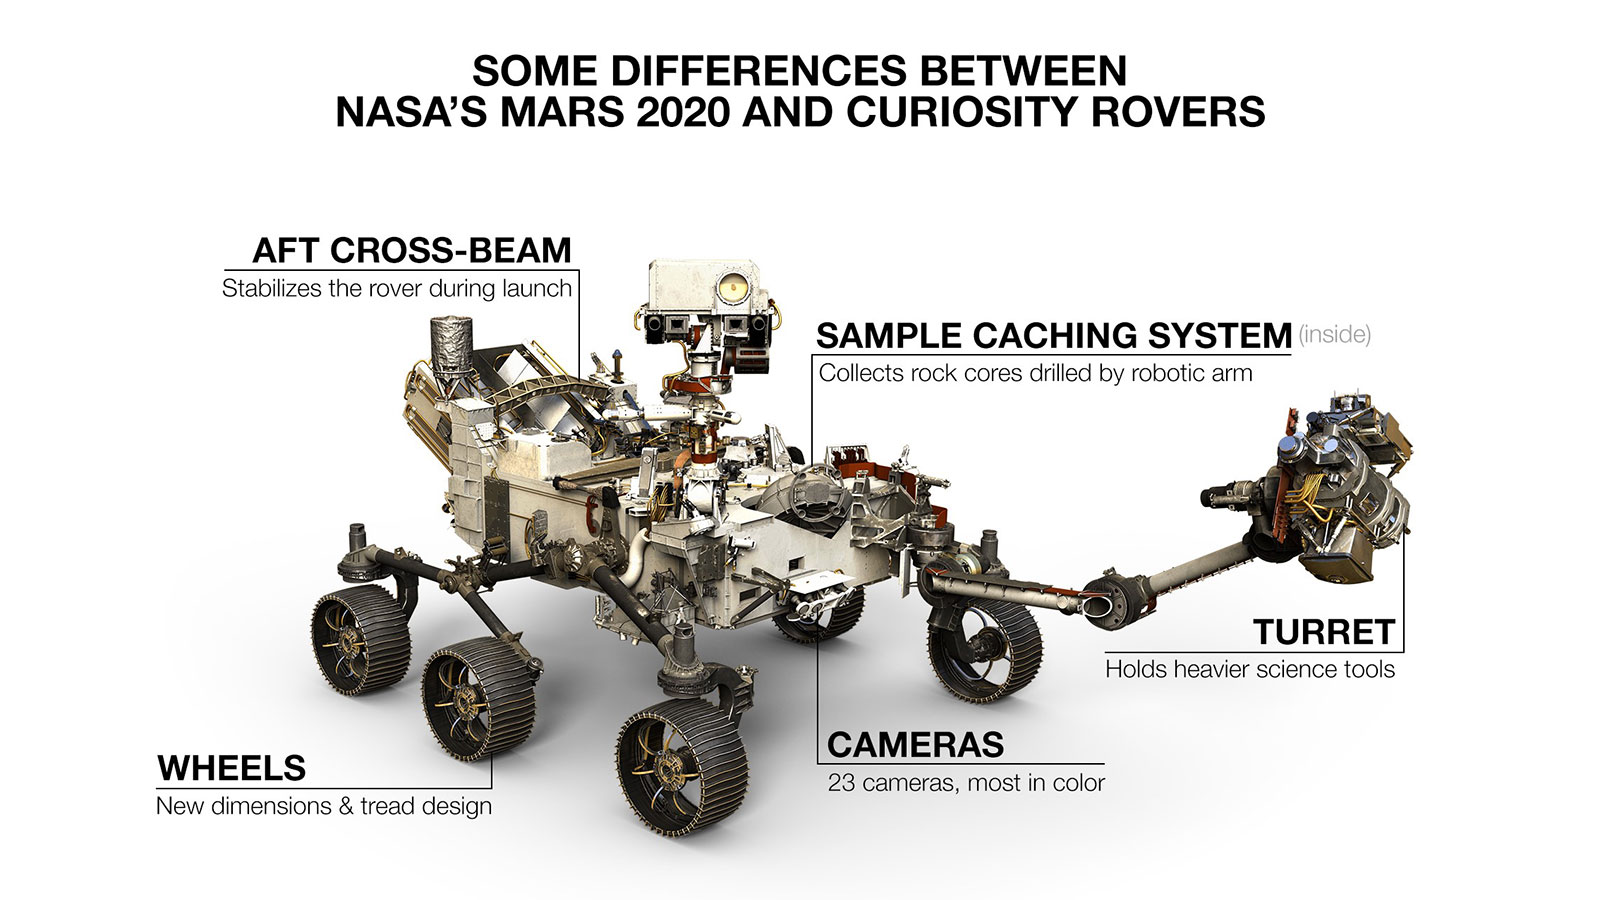 This image shows some differences between NASA's Mars 2020 and Curiosity rovers.